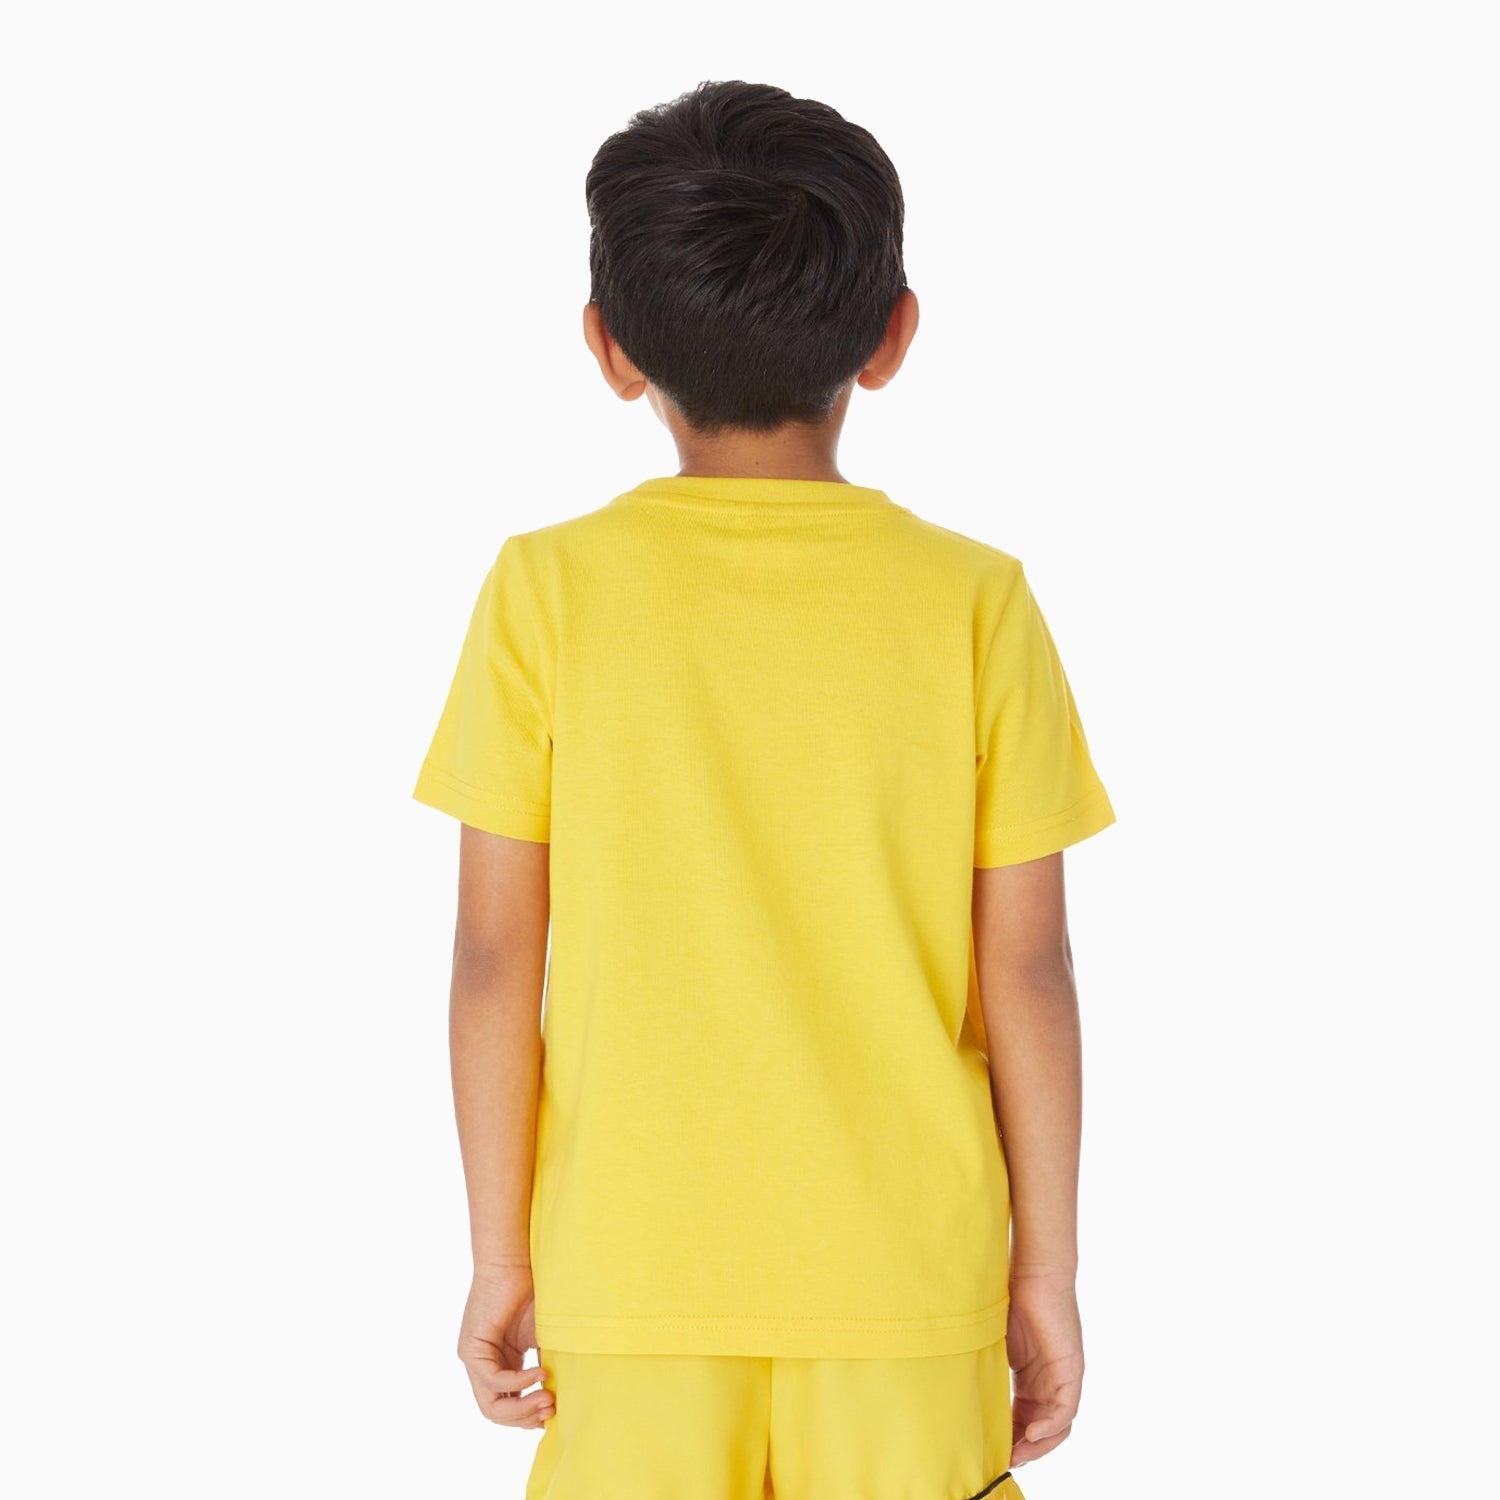 kappa-kids-authentic-estessi-outfit-304kpt0y-a3t-34157fwy-a0h